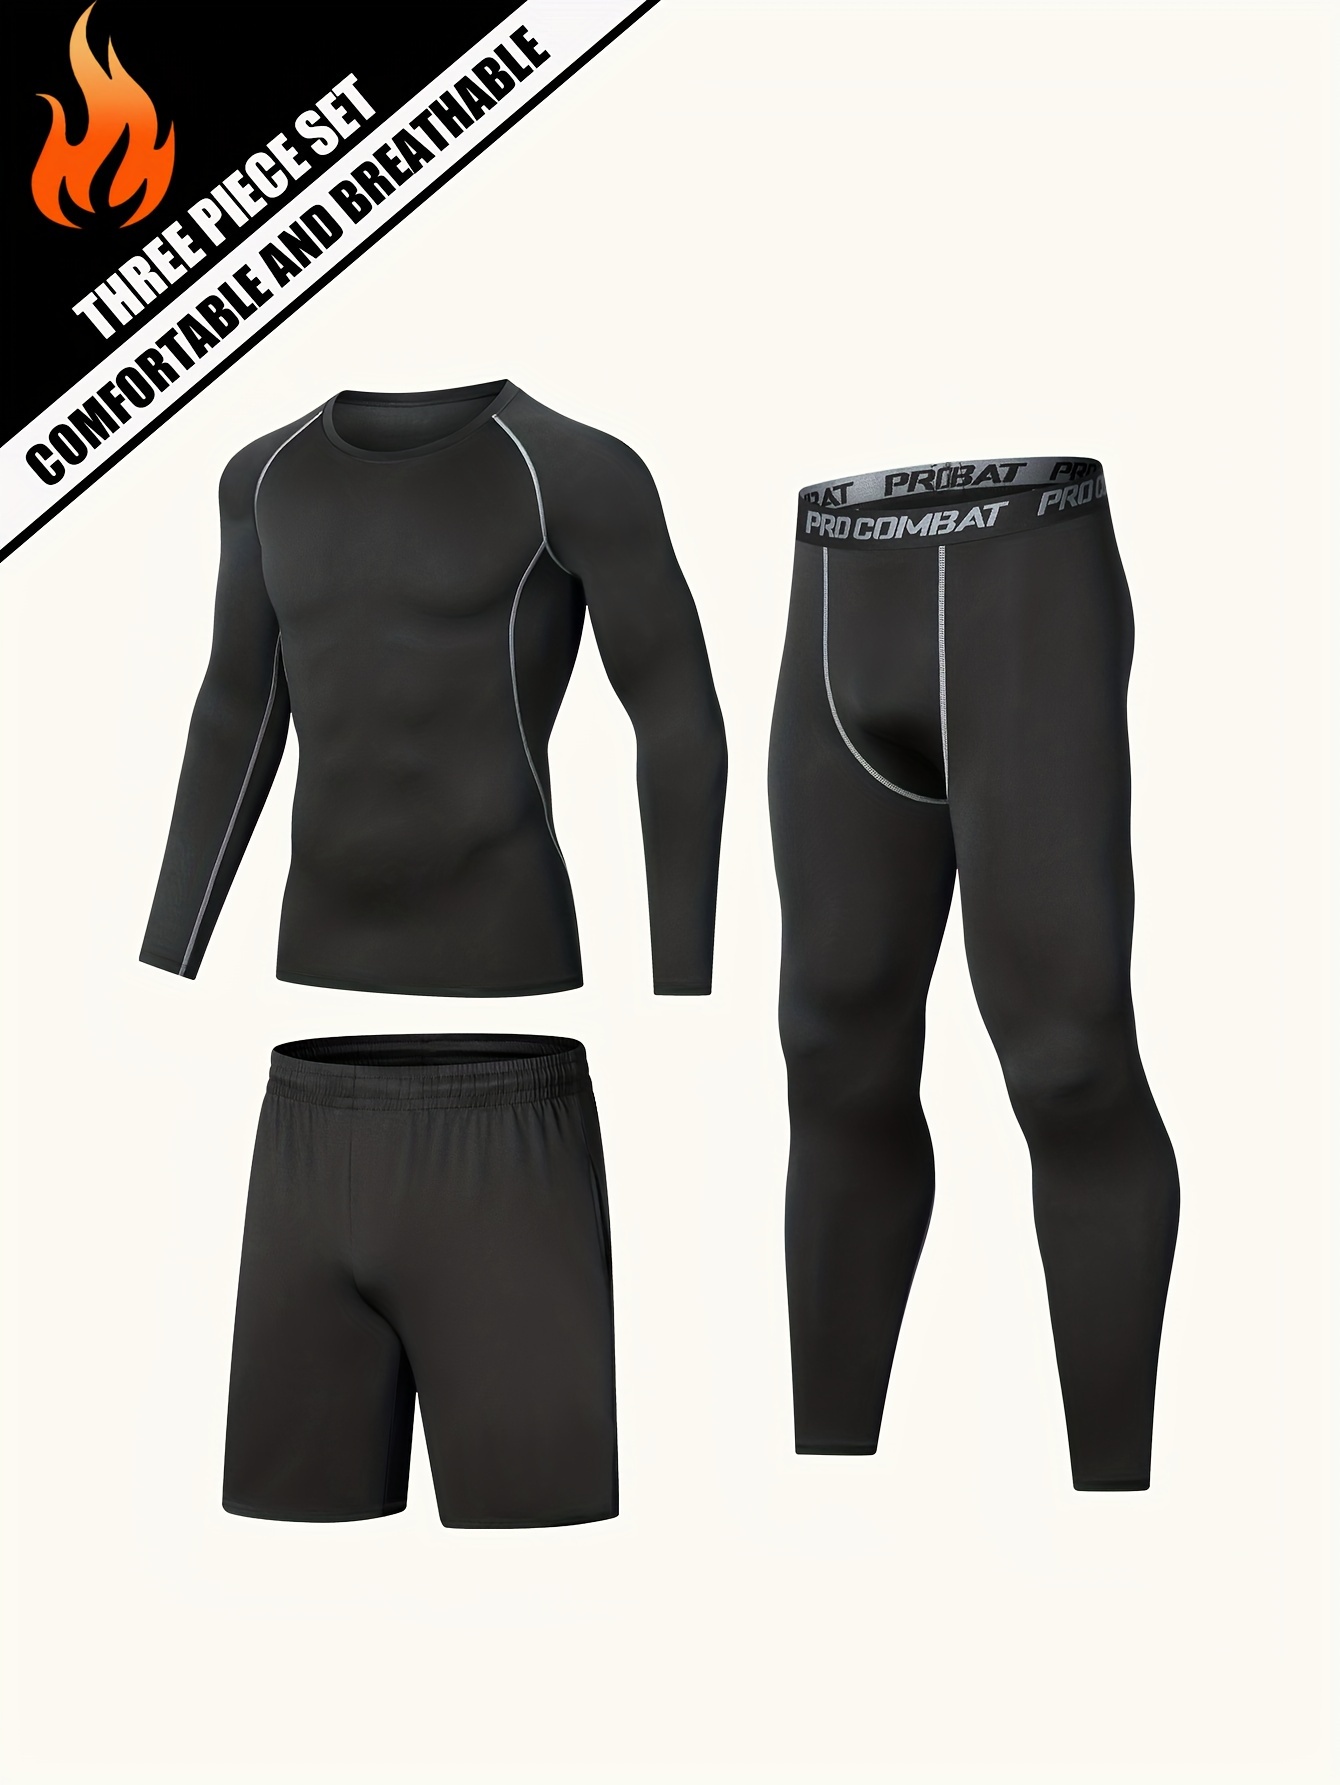 Men's 3-Piece Compression Suit Set: Slim Fit, Breathable, Quick Drying &  Sweat Absorbing For Sports & Fitness!